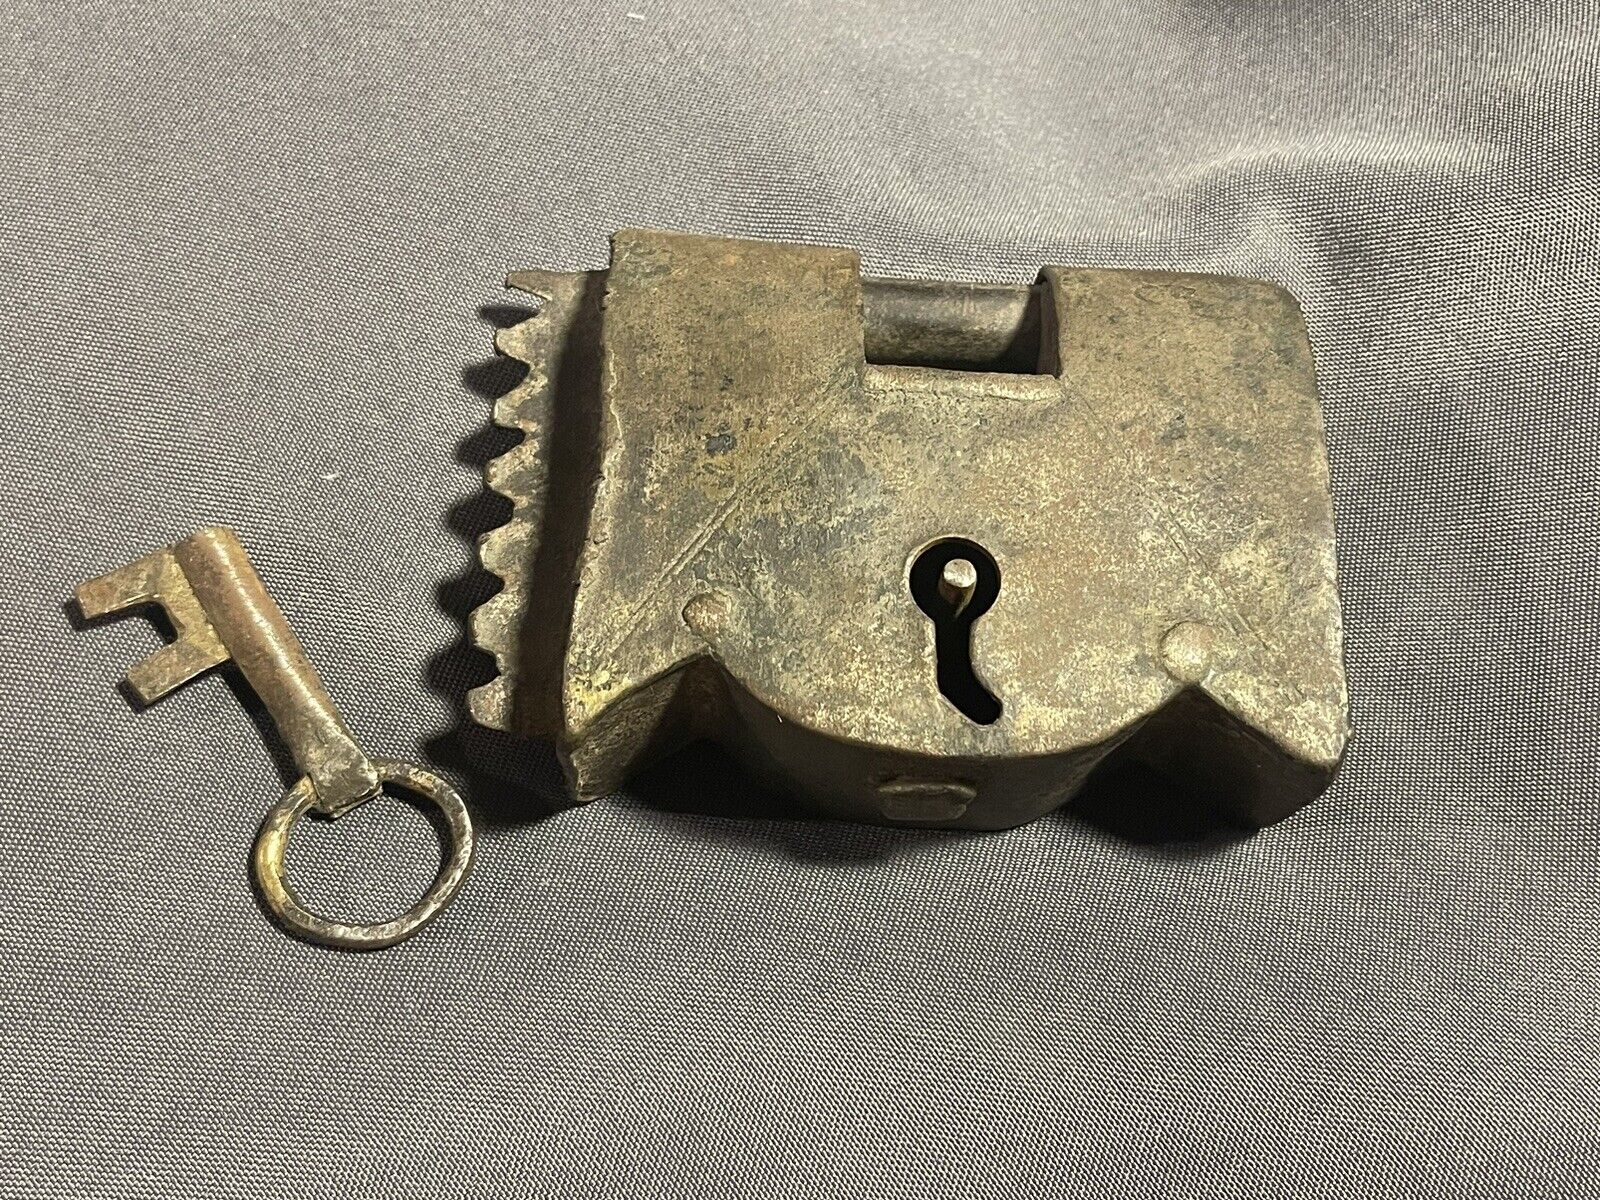 Very Early Antique Hand Wrought Primitive Lock & Key works